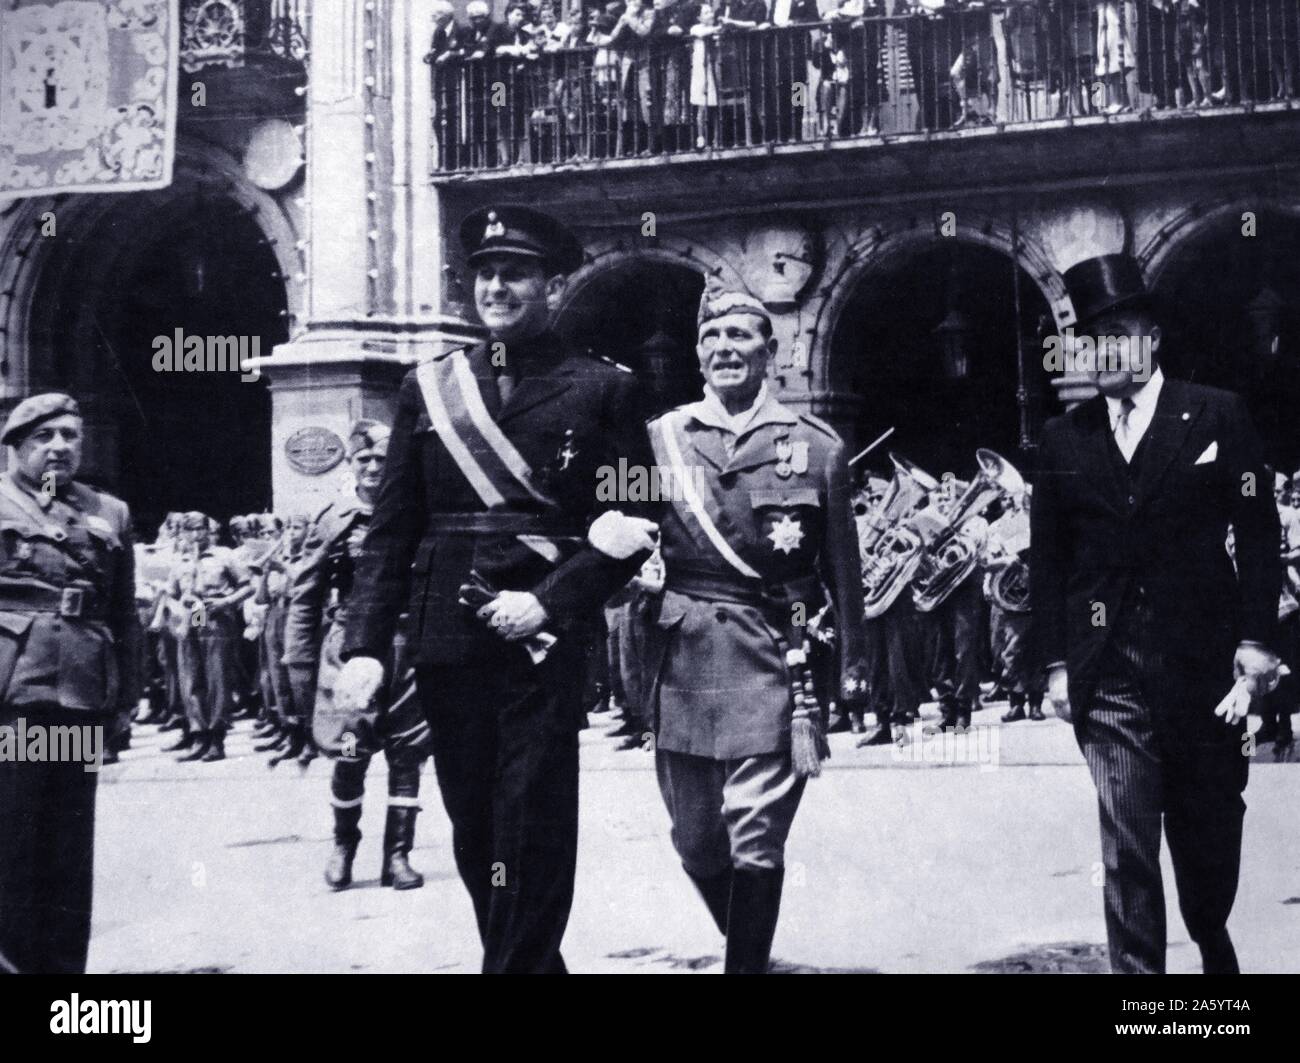 Pedro Teotónio Pereira Portuguese ambassador to Spain walks with Nationalist Spanish general Millán-Astray in Salamanca, and (right) Nicolas Franco, during the Spanish civil war. José Millán-Astray y Terreros (1879 – 1954) Spanish soldier, the founder and first commander of the Spanish Foreign Legion. Pedro Teotónio Pereira (1902 – 1972) Portuguese diplomat. played a decisive role, helping the allies, in drawing Spain with Portugal into a neutral bloc during World War II. Nicolás Franco (1891 - 1977)Spanish soldier and politician; brother of Francisco Franco, Stock Photo